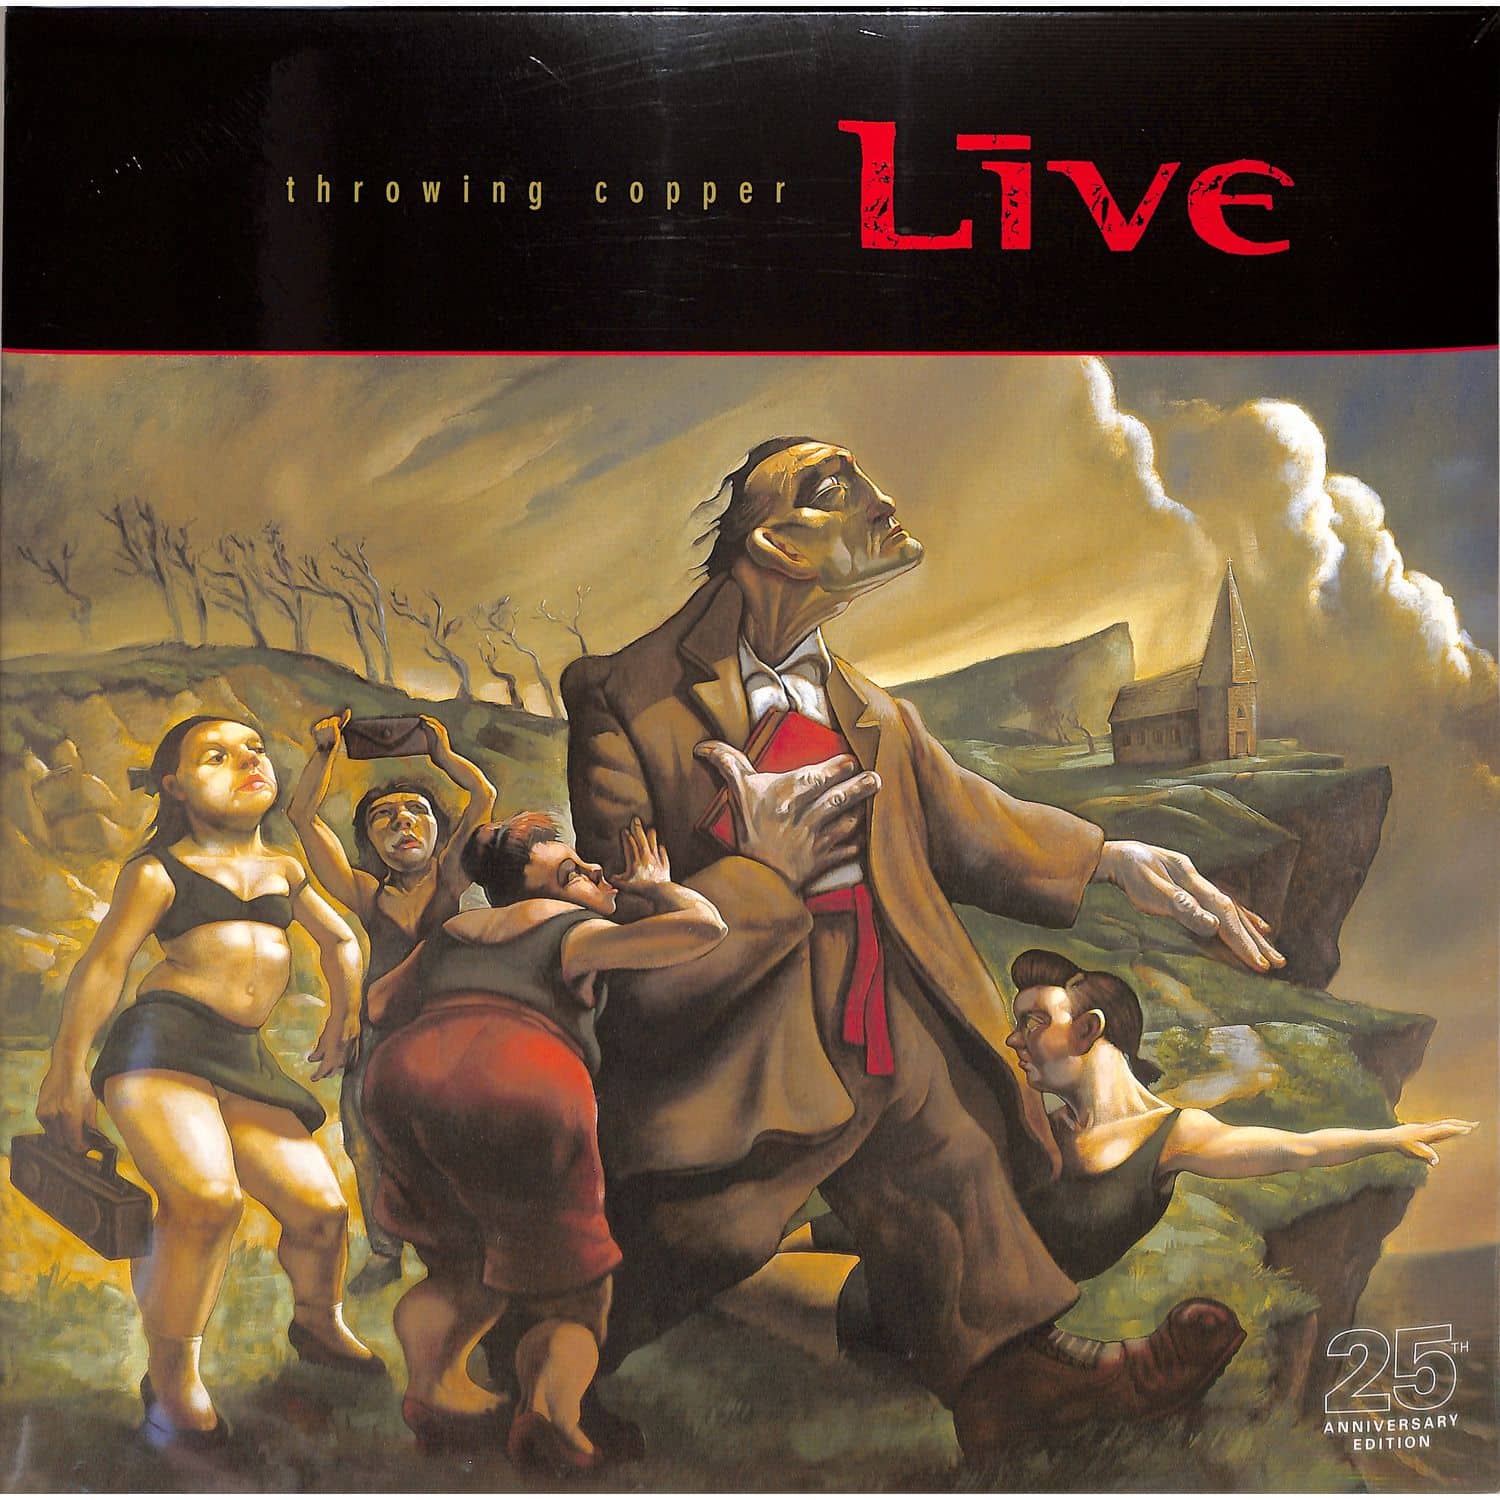 Live - THROWING COPPER 